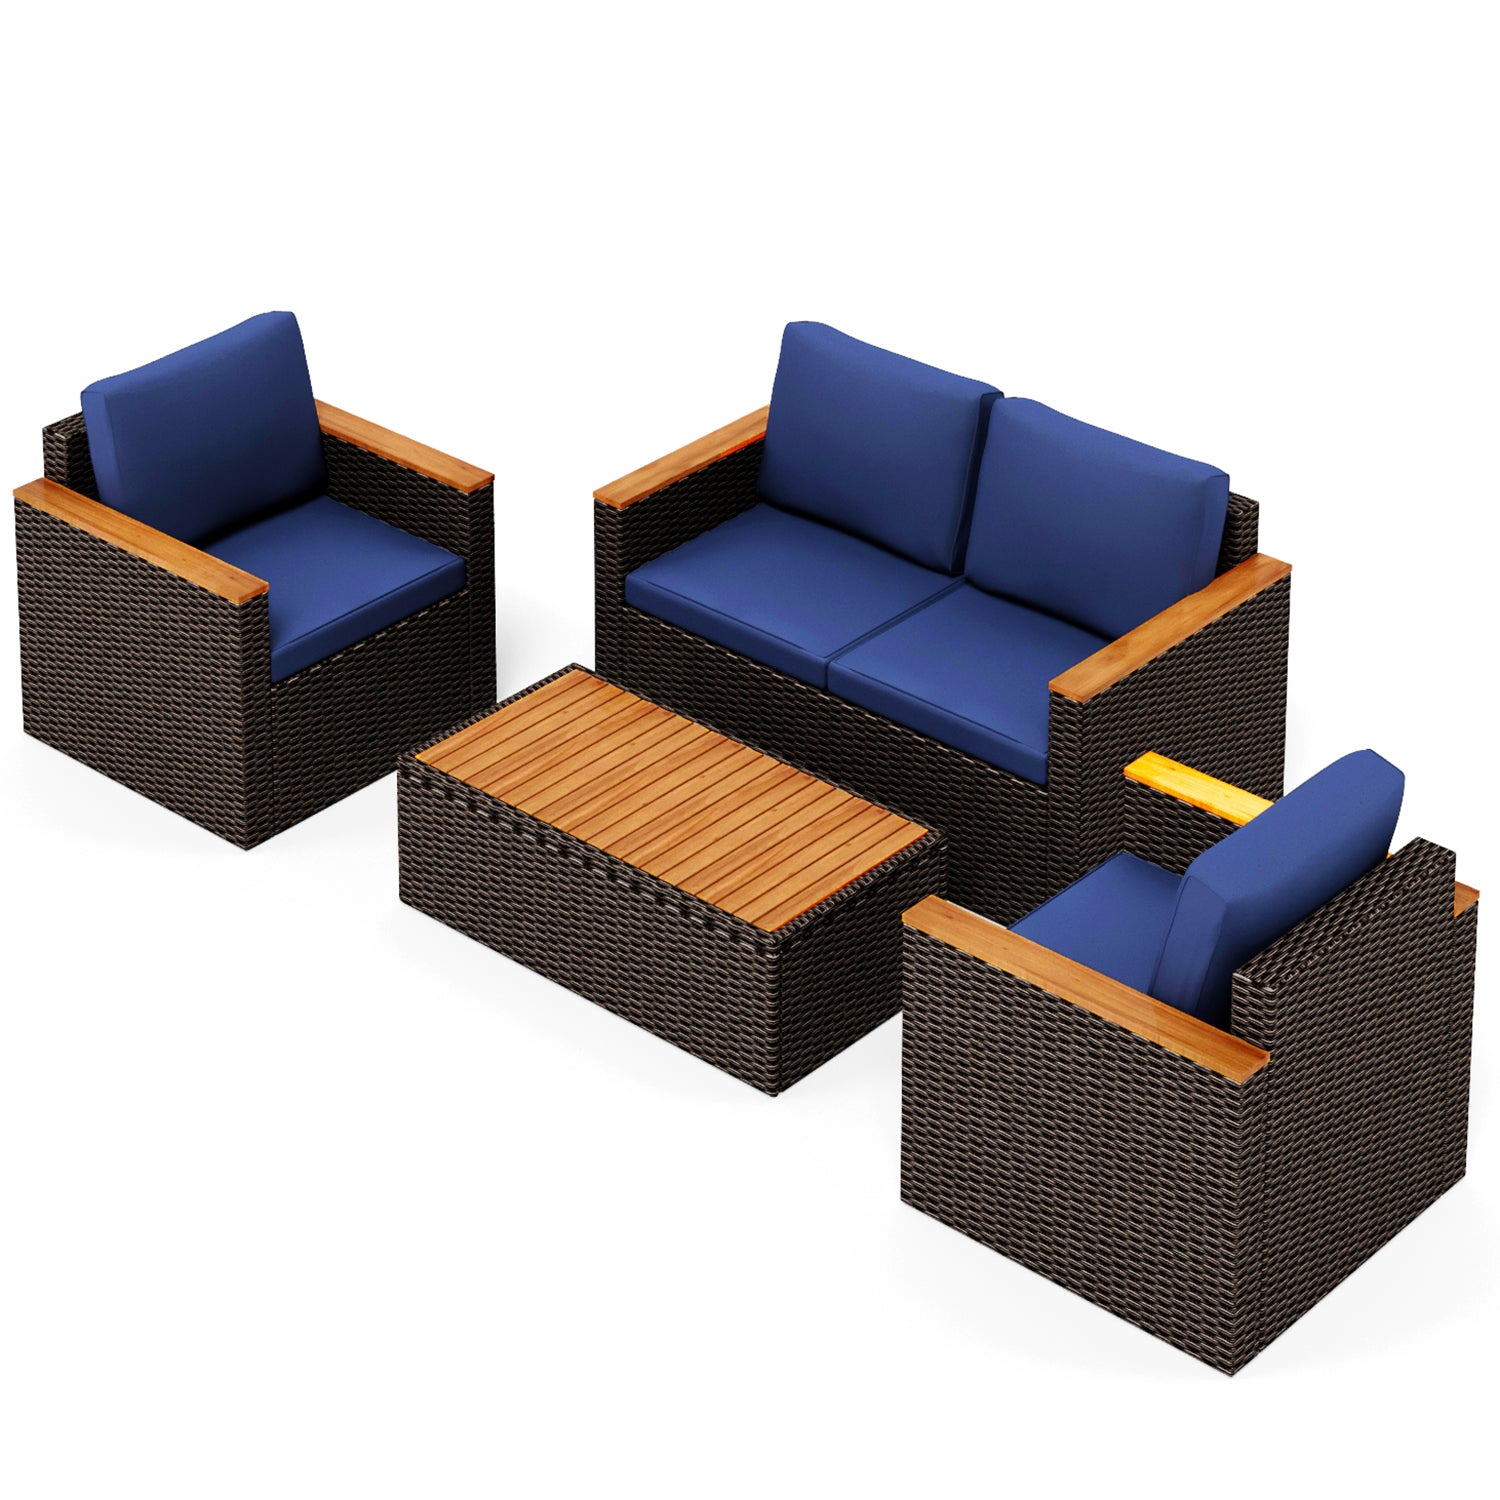 MFSTUDIO 4-Piece Patio Wicker Sectional Sofa Conversation Sets with Table